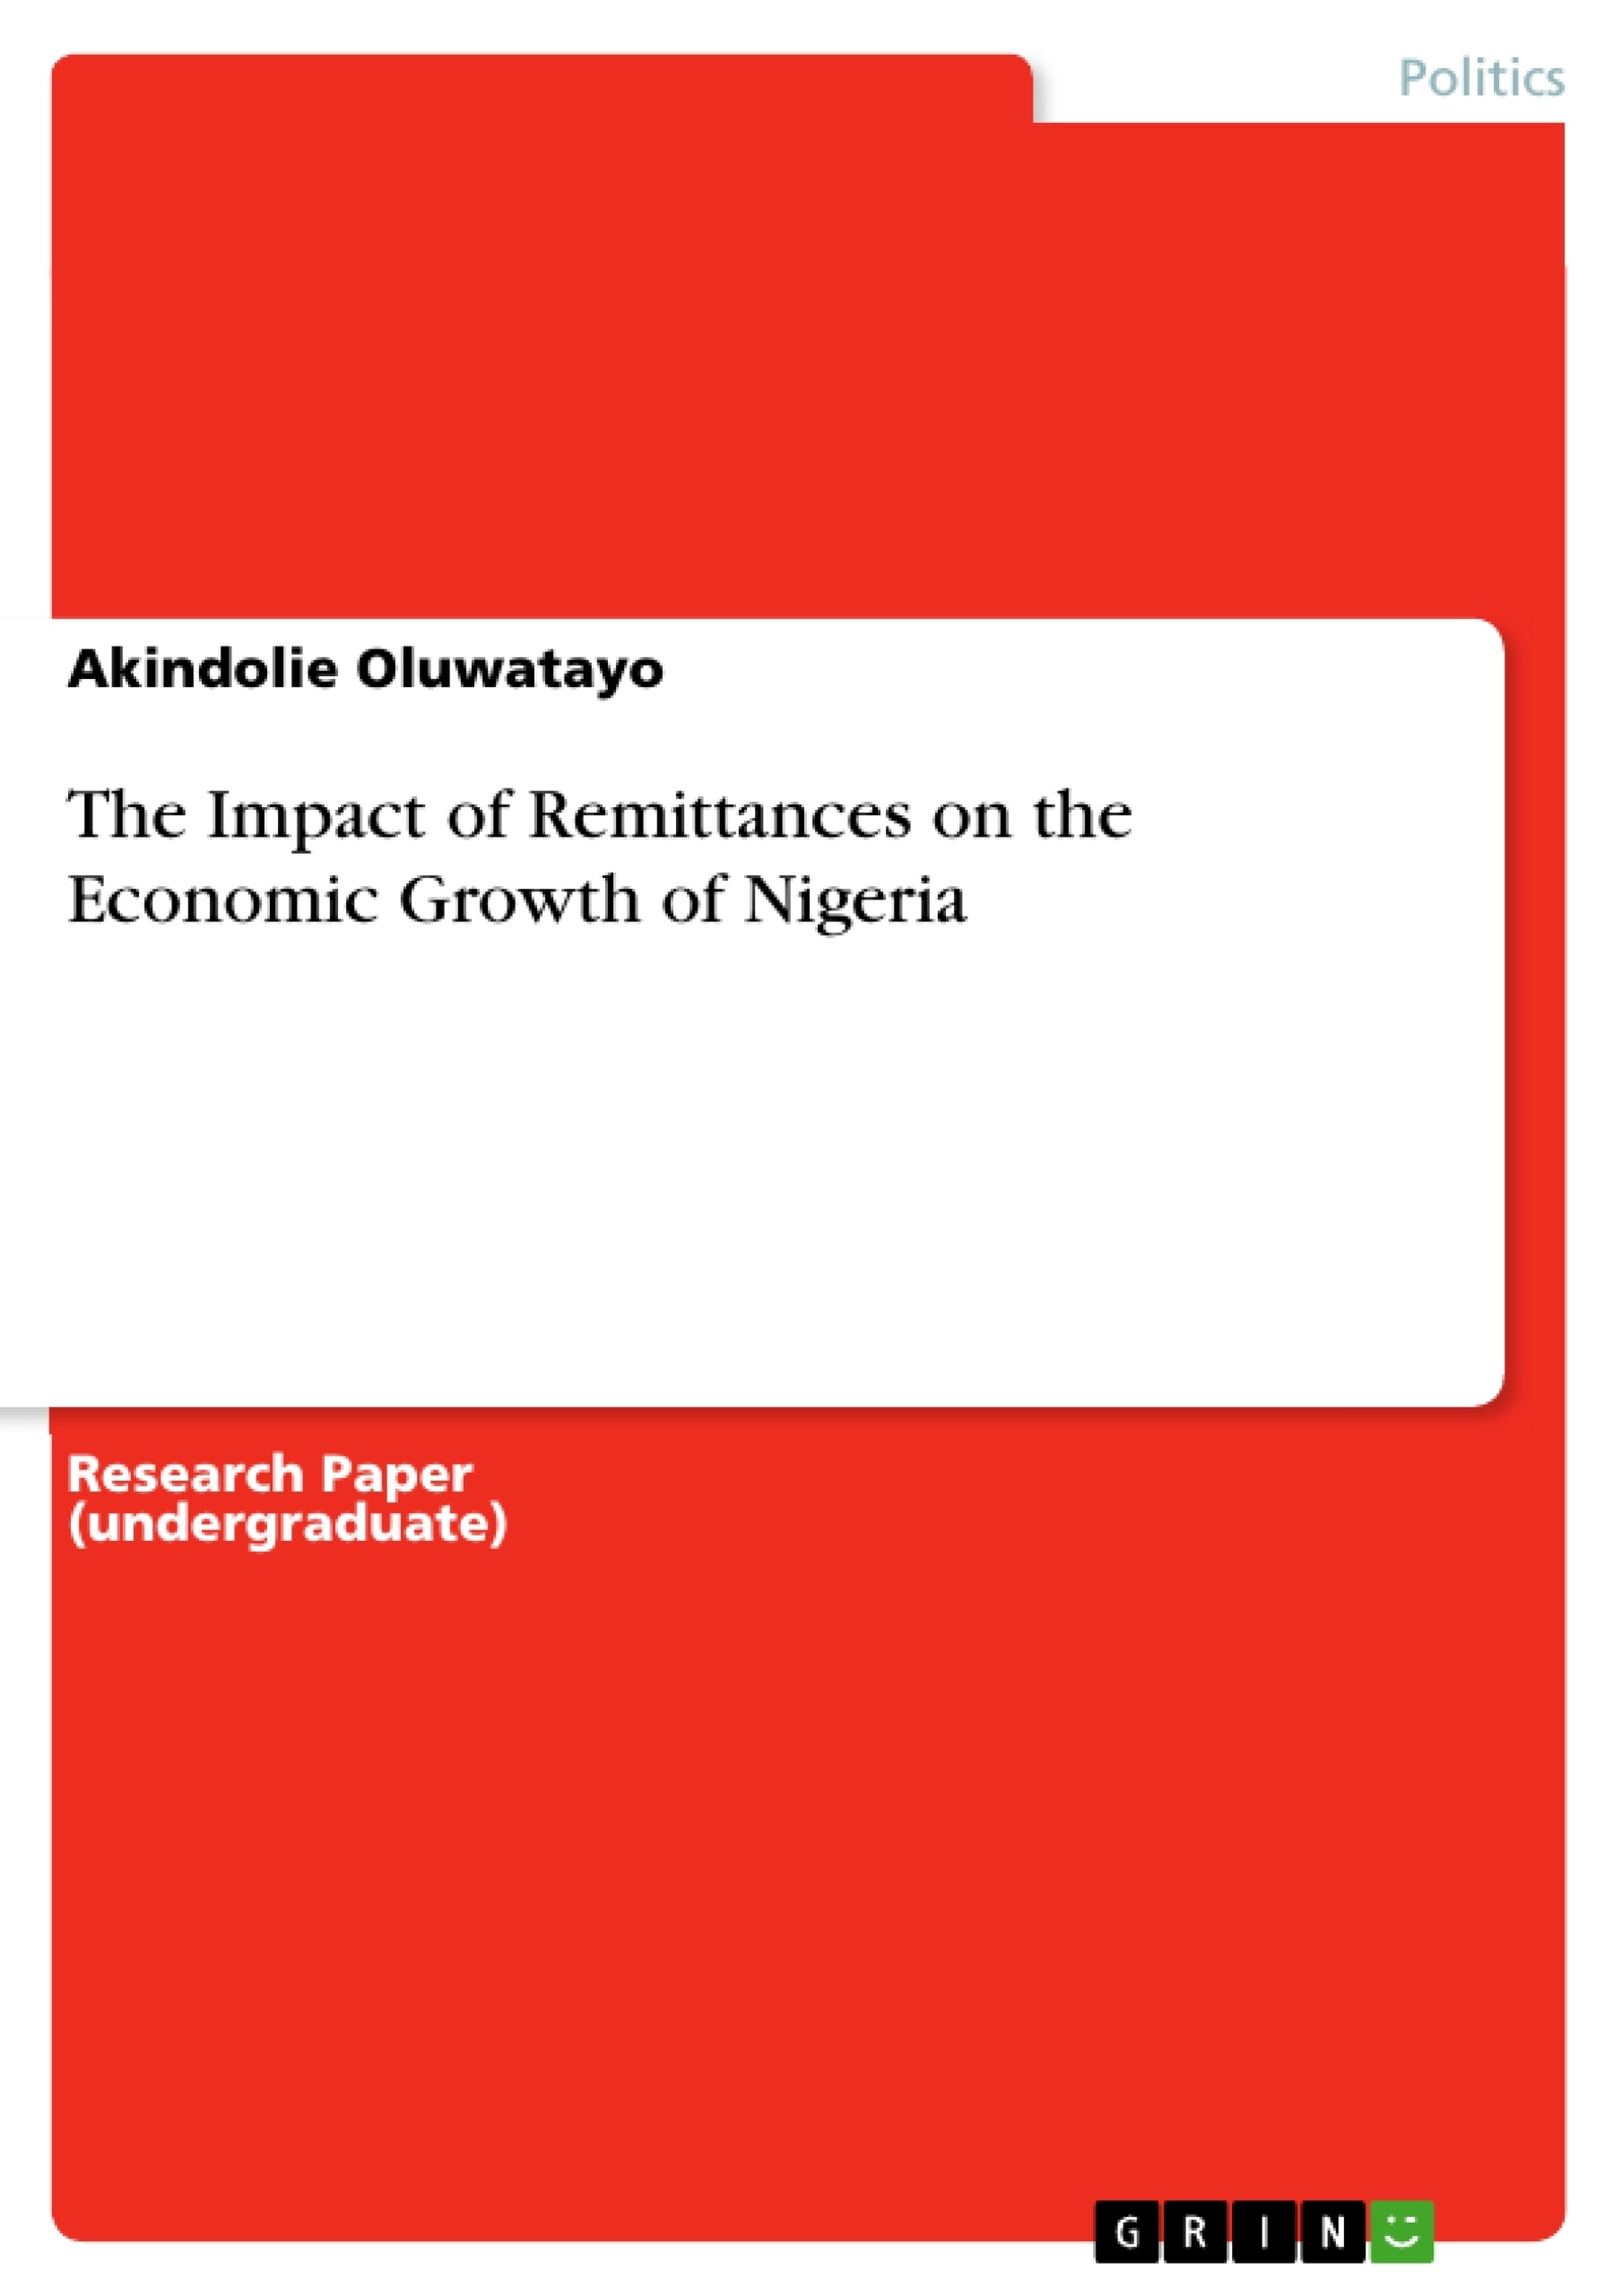 Title: The Impact of Remittances on the Economic Growth of Nigeria